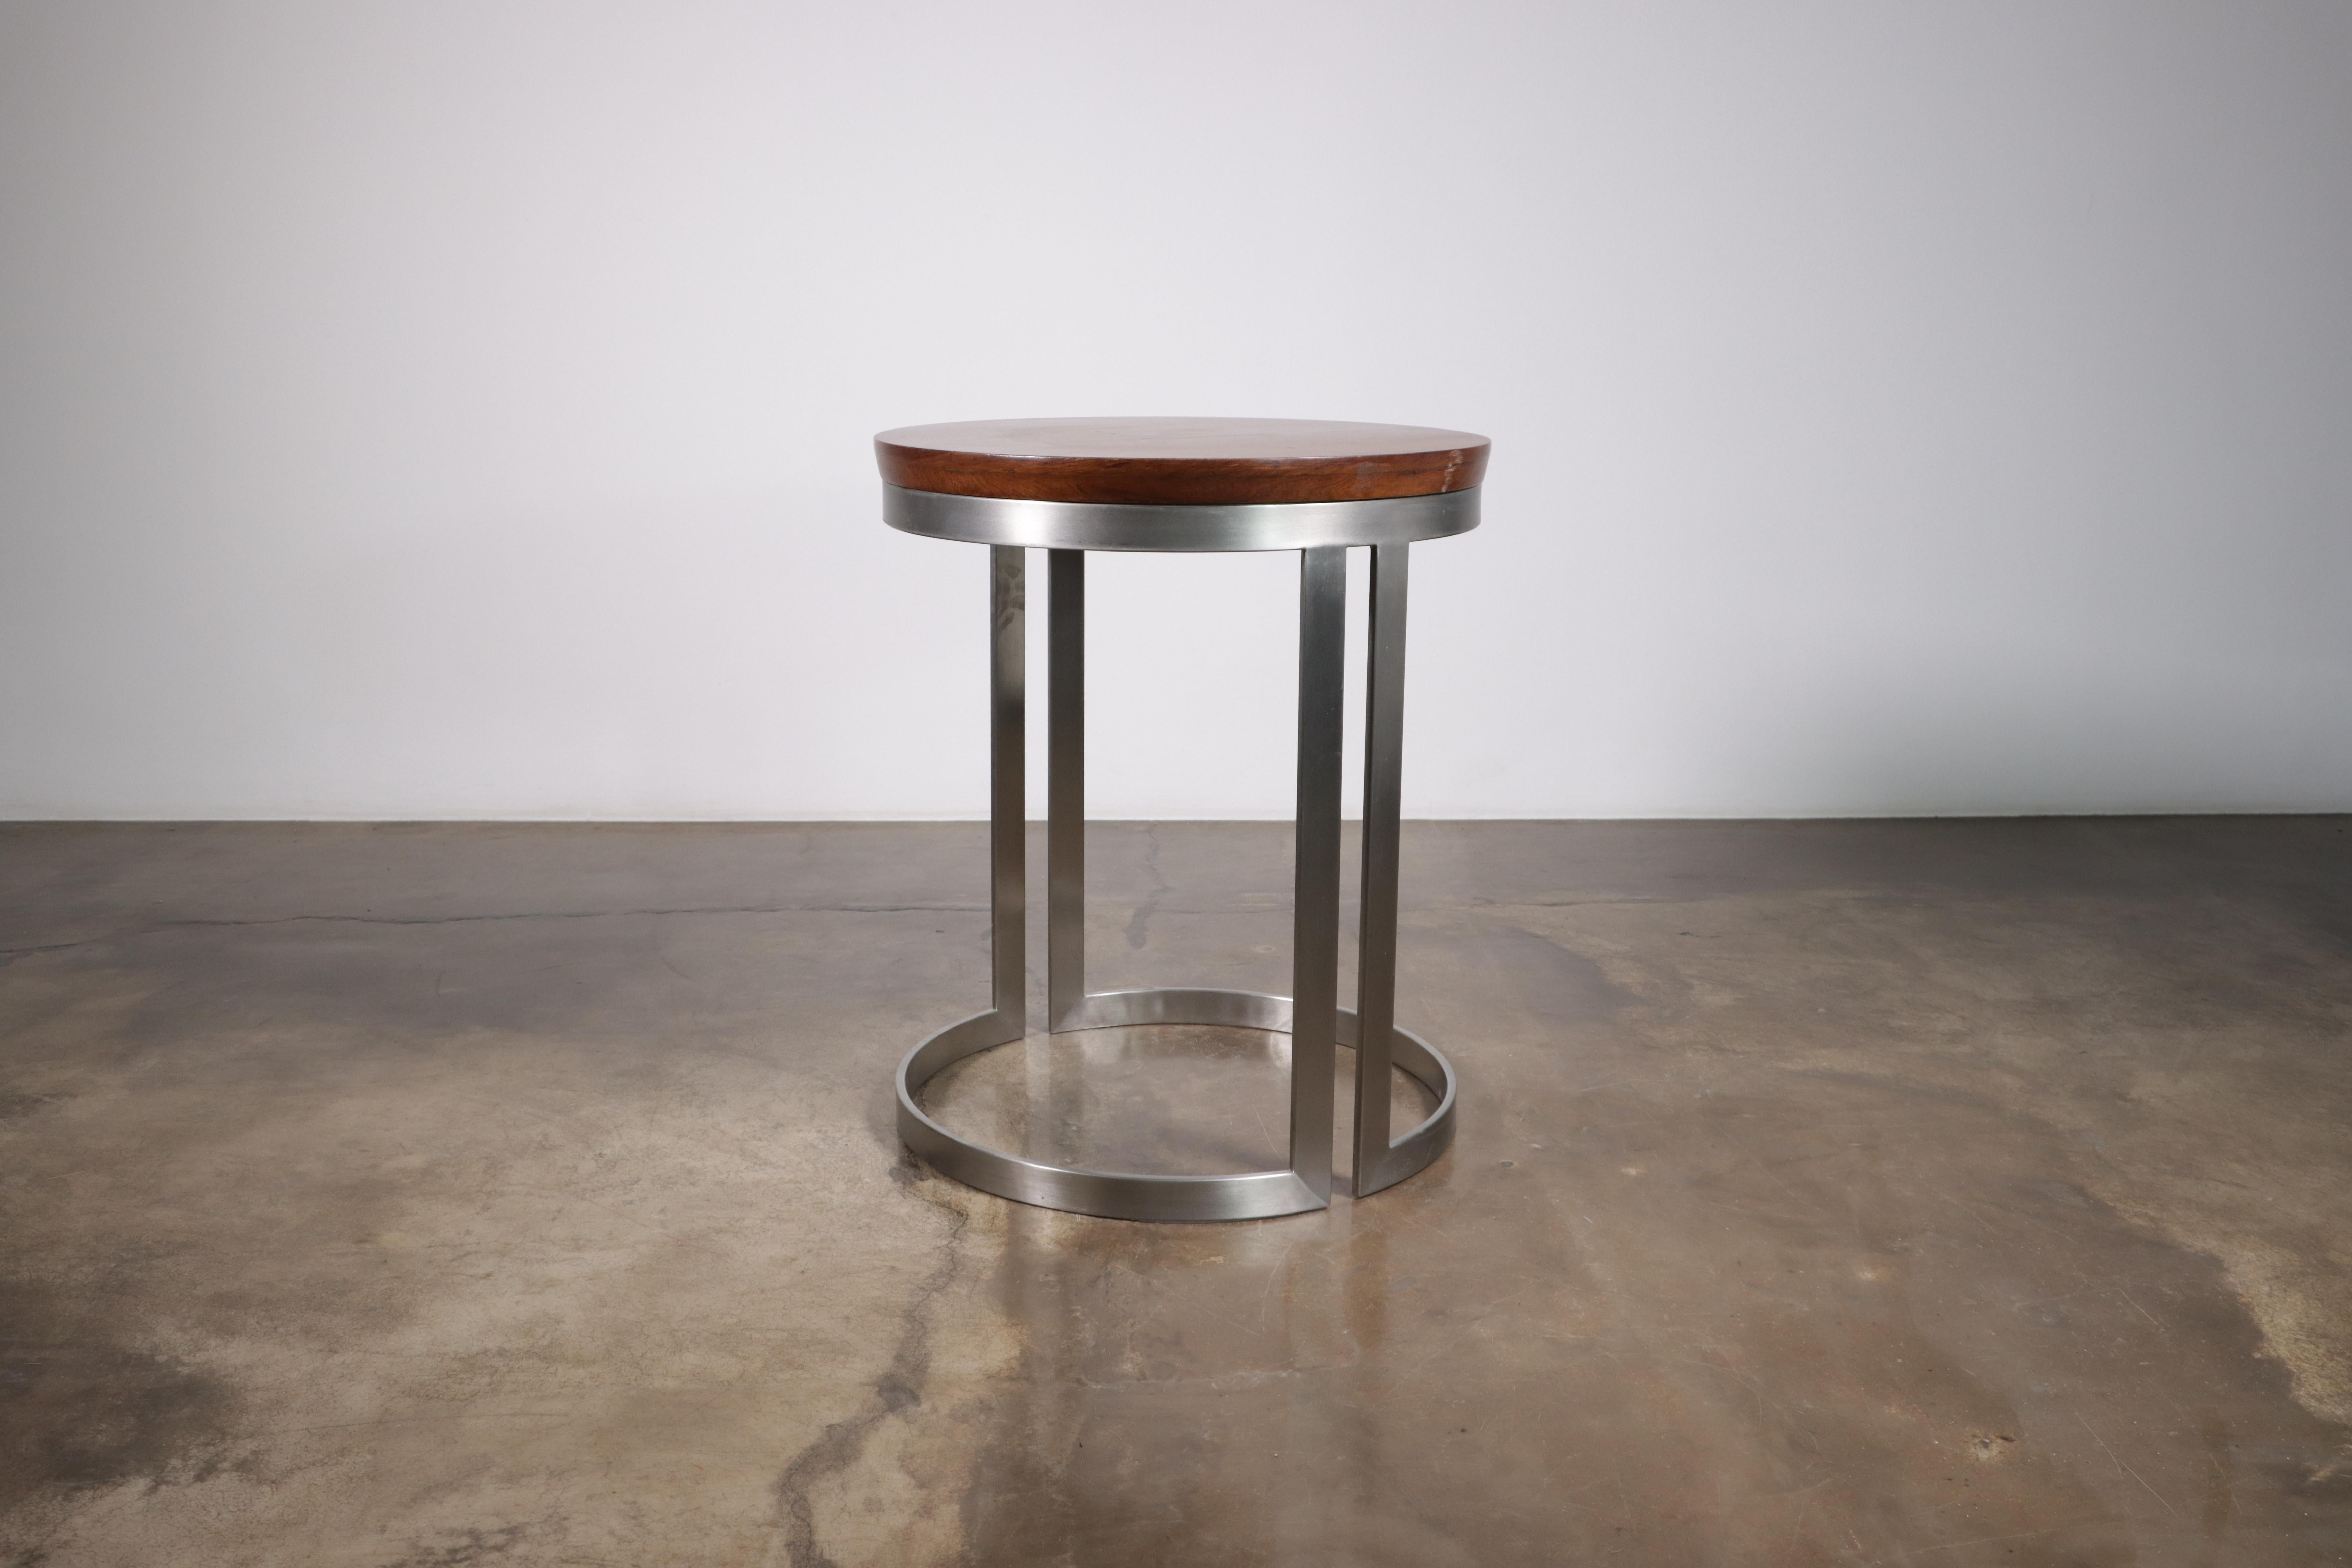 Trillo Modern side table by Costantini design - in stock 

Measures: 22.5